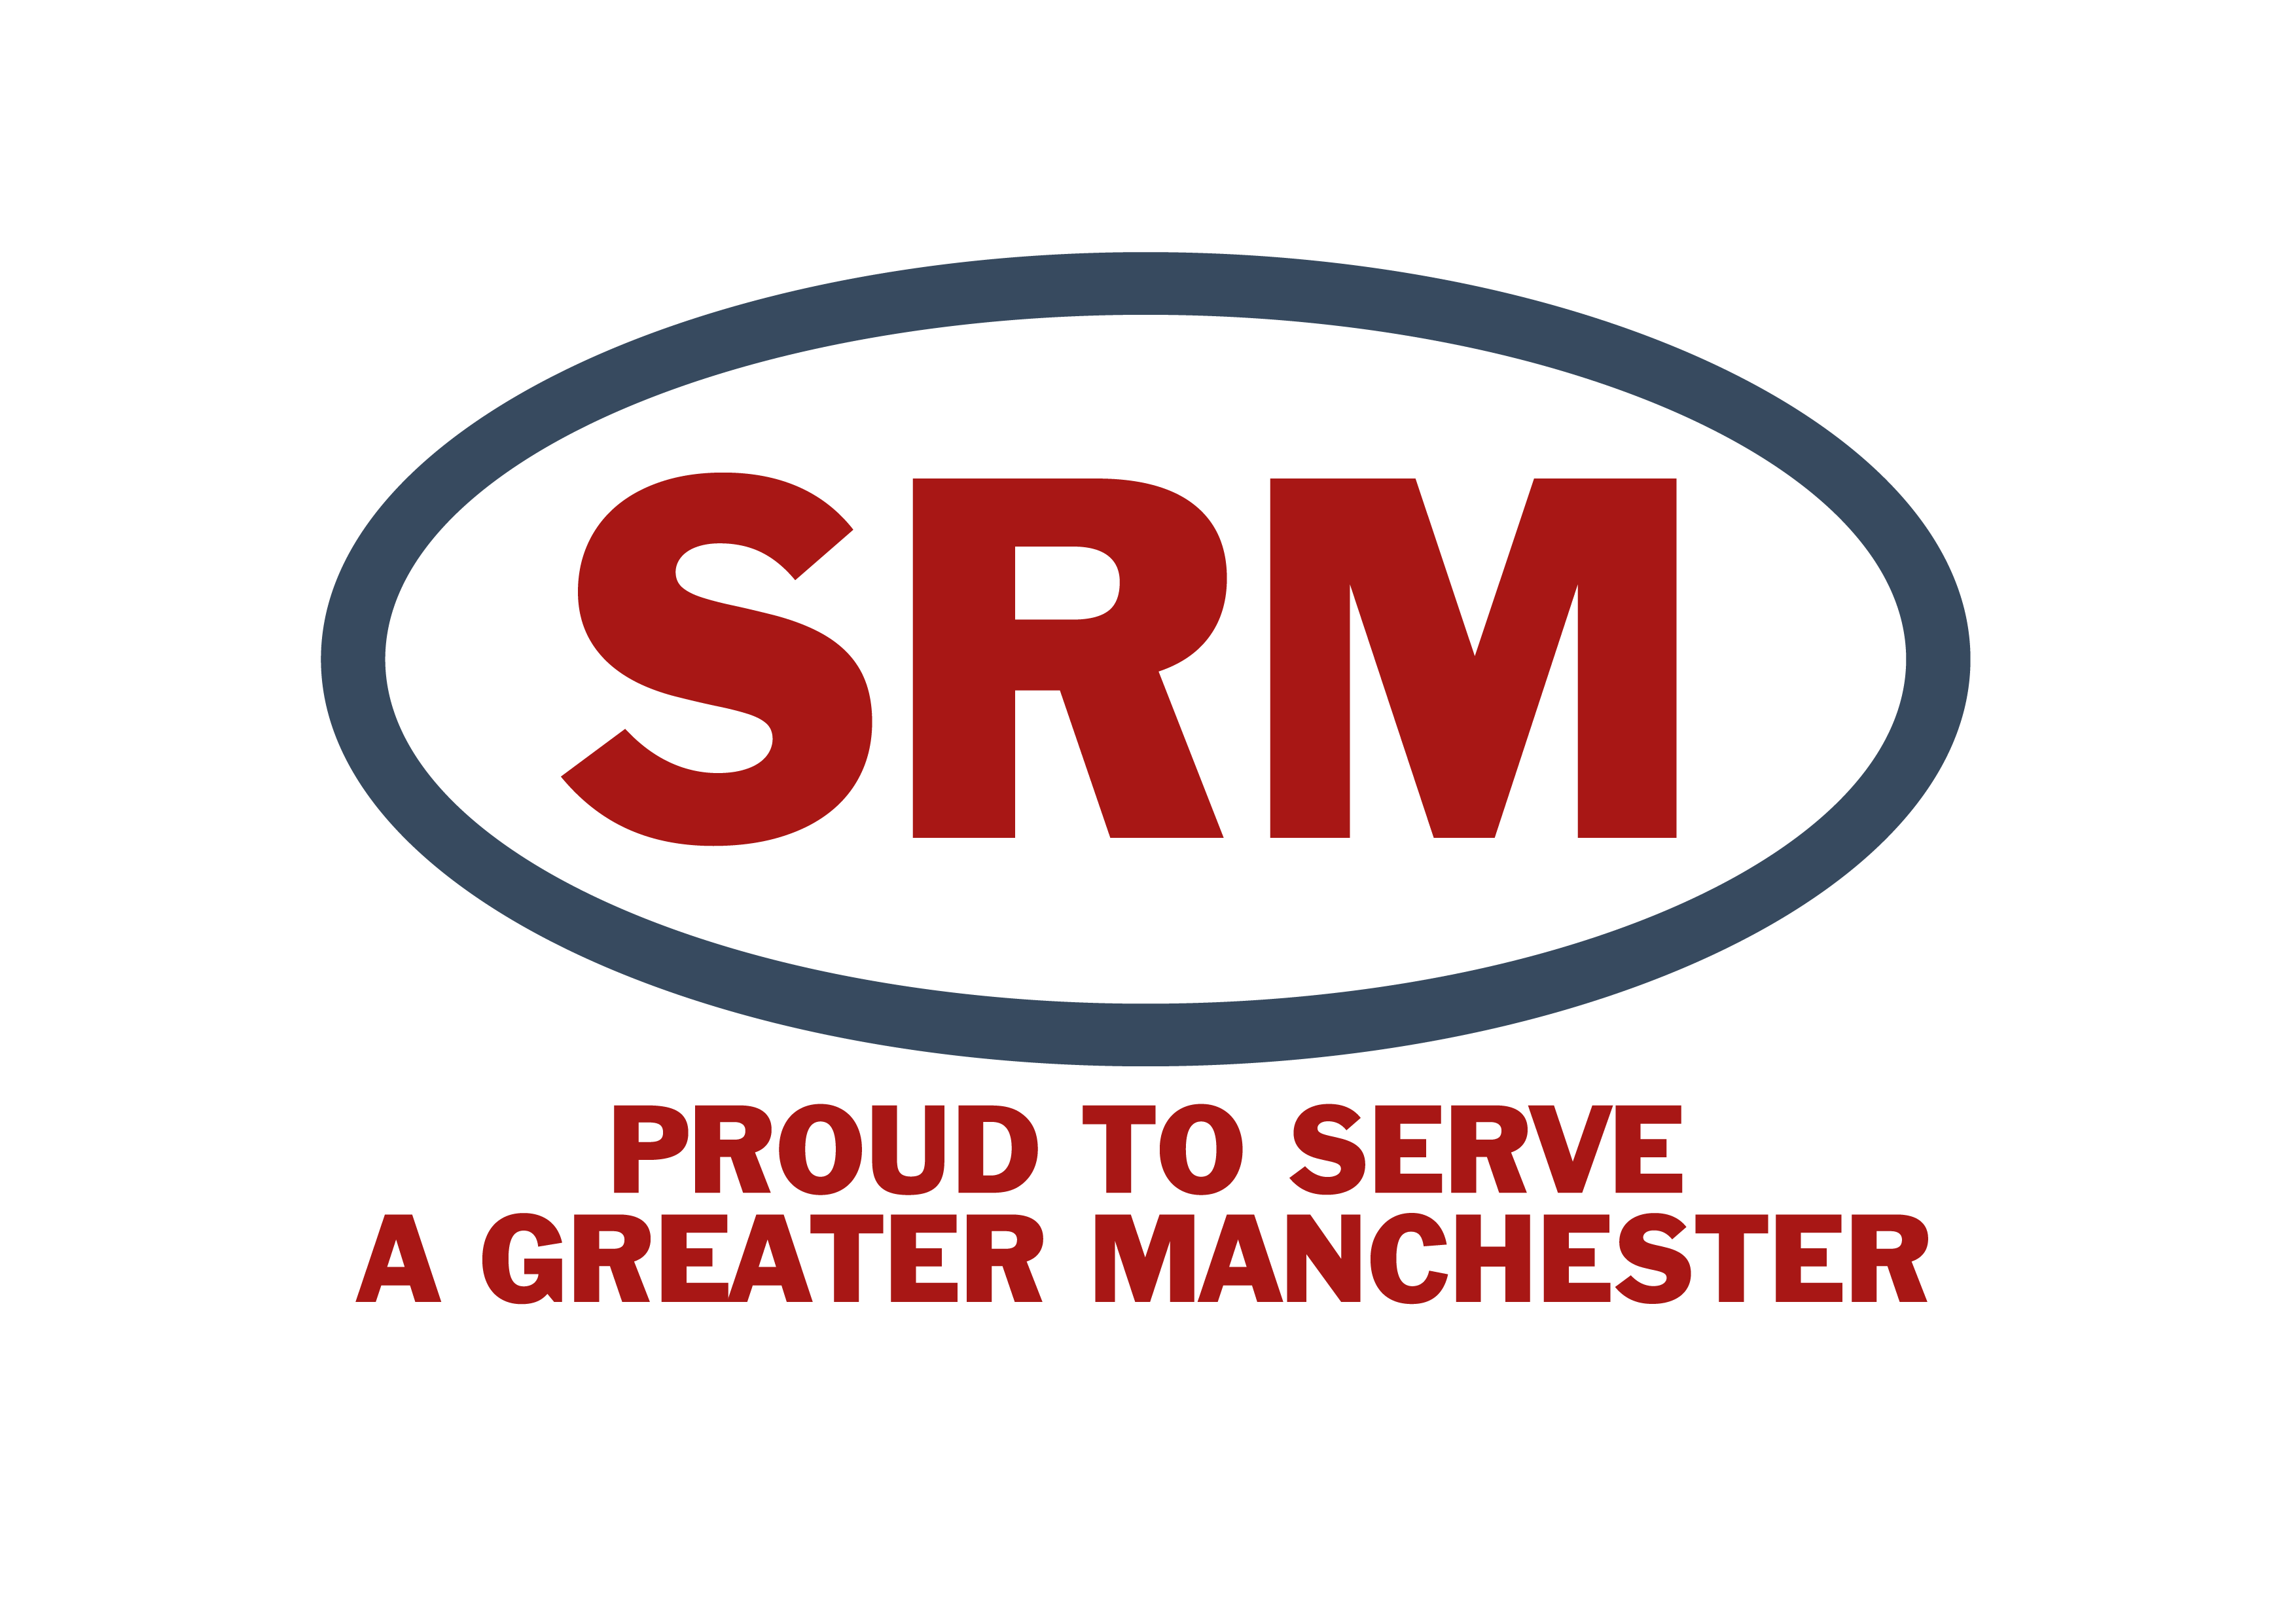 Orders for the new SRM brand will be managed through a new area hub at Aggregate Industries' Stalybridge plants